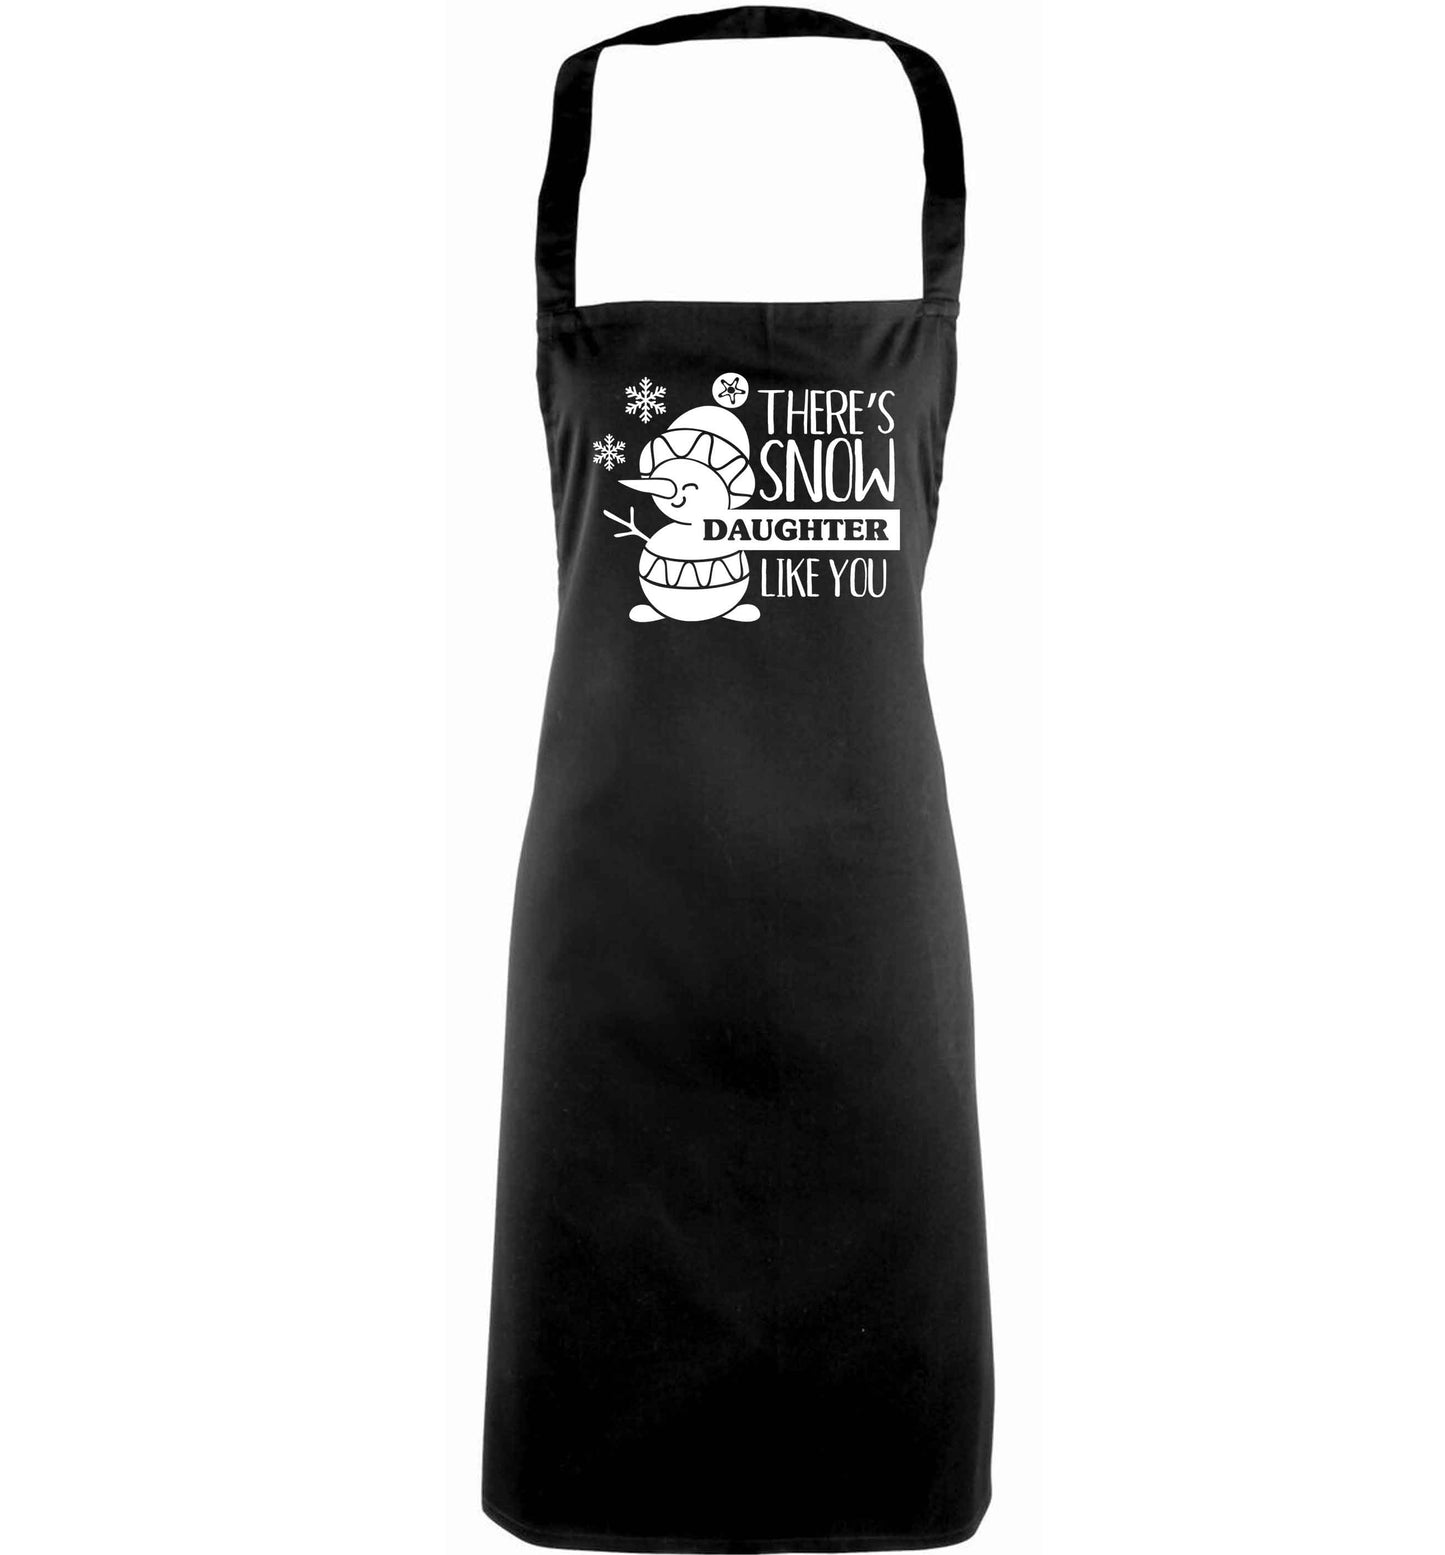 There's snow daughter like you adults black apron